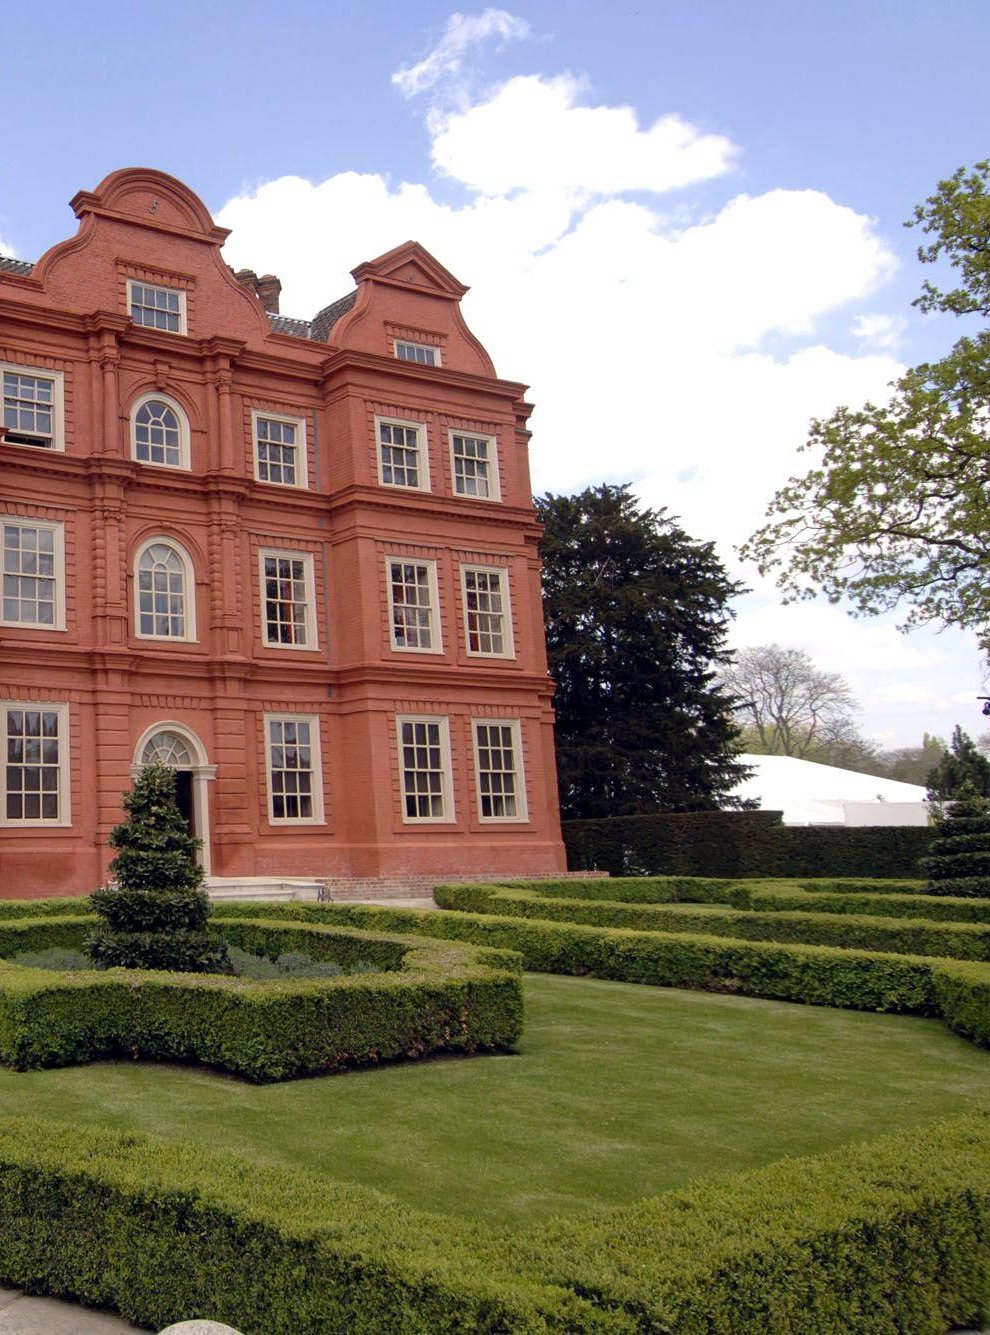 Kew Palace in London was once the home of King George III 